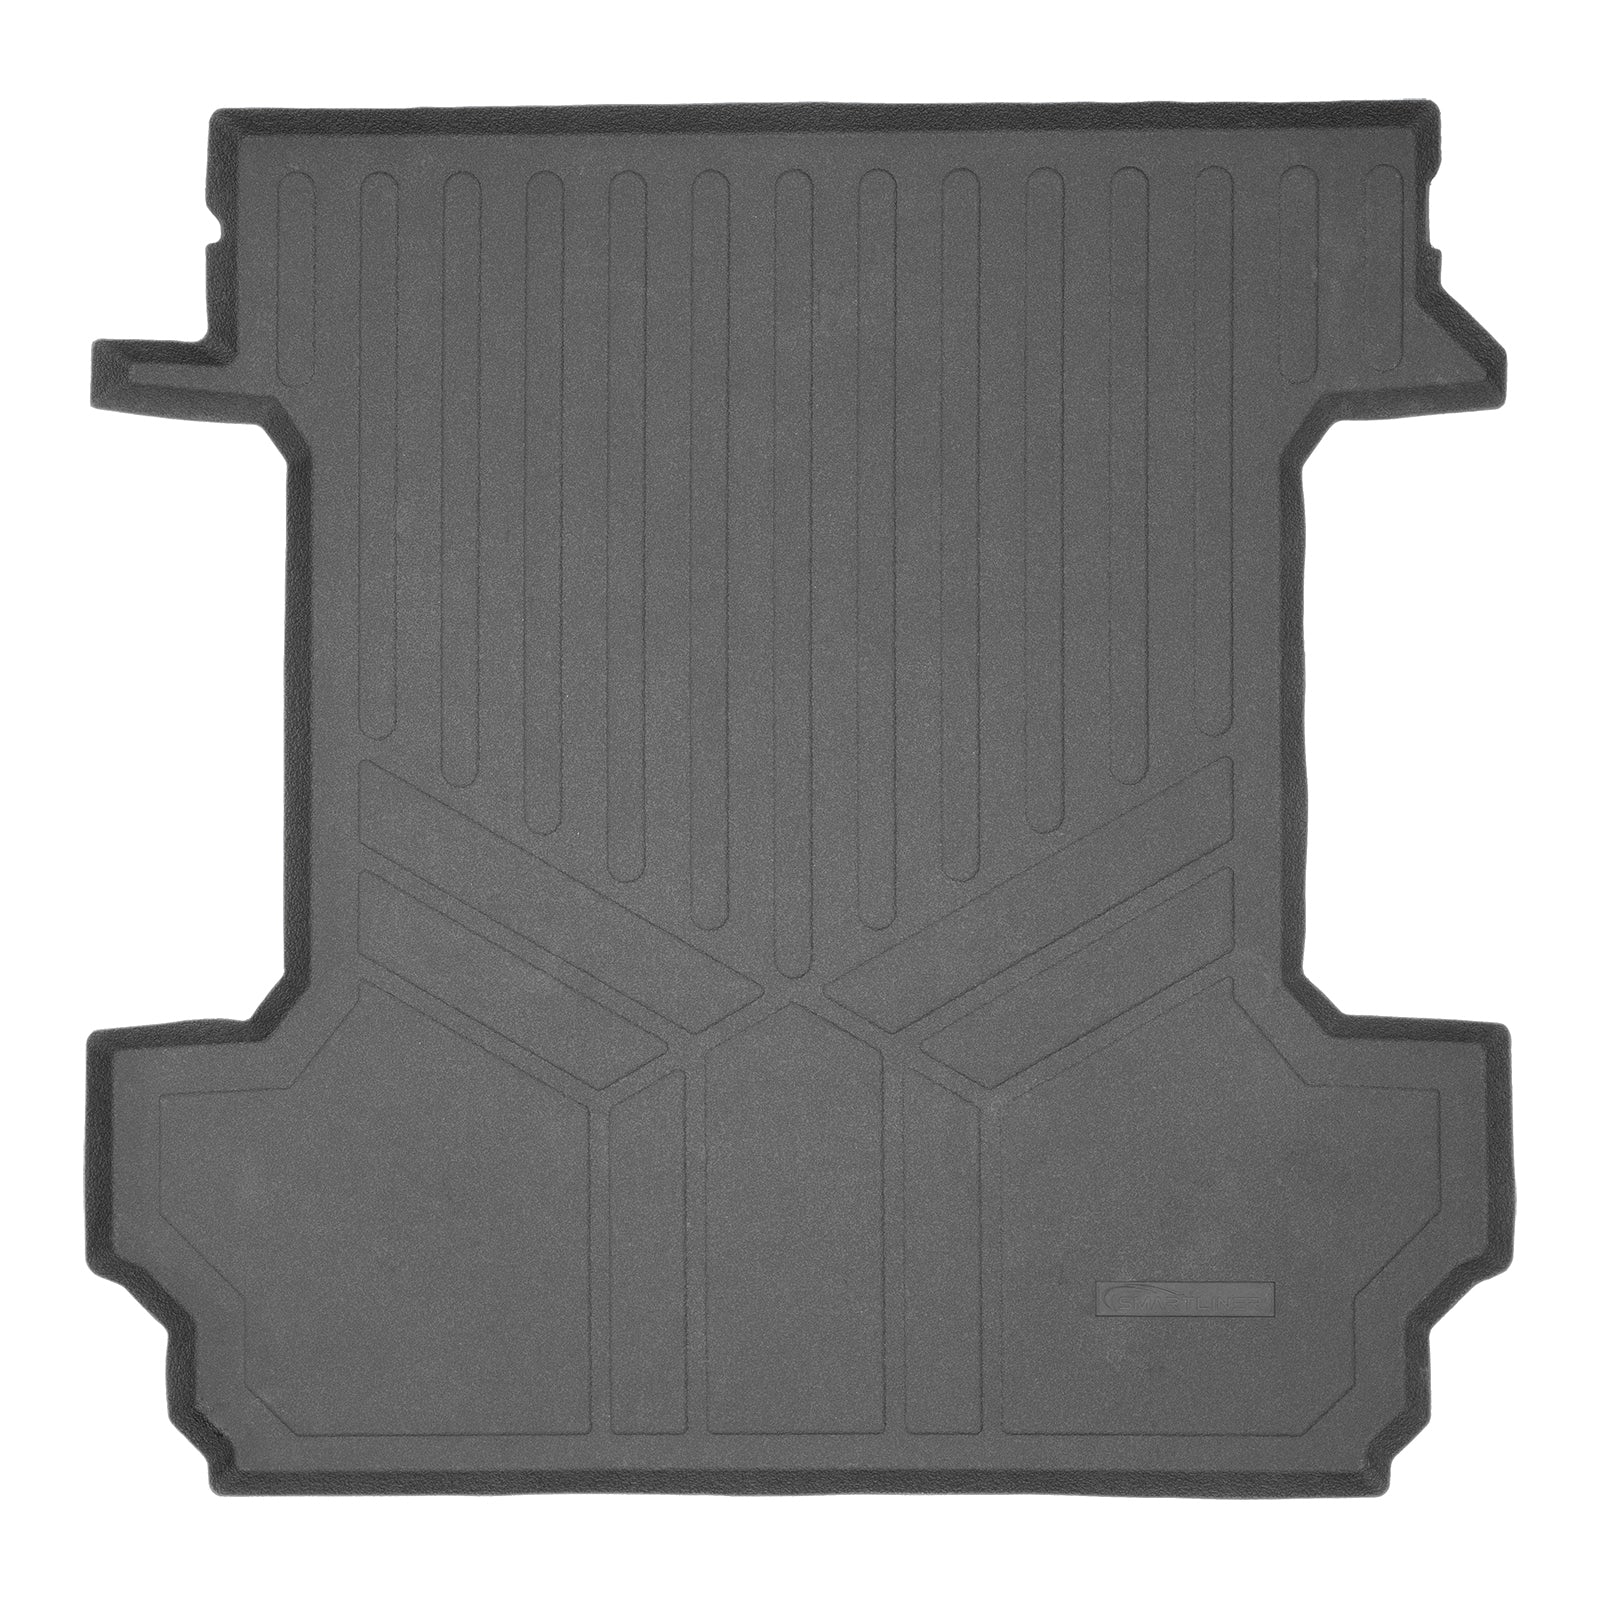 SMARTLINER Custom Fit Floor Liners For 2019-2023 Chevrolet Silverado 1500 Crew Cab With 1st Row Bench Seat (OTH Coverage) and Vinyl Flooring with the 2nd Row Underseat Storage